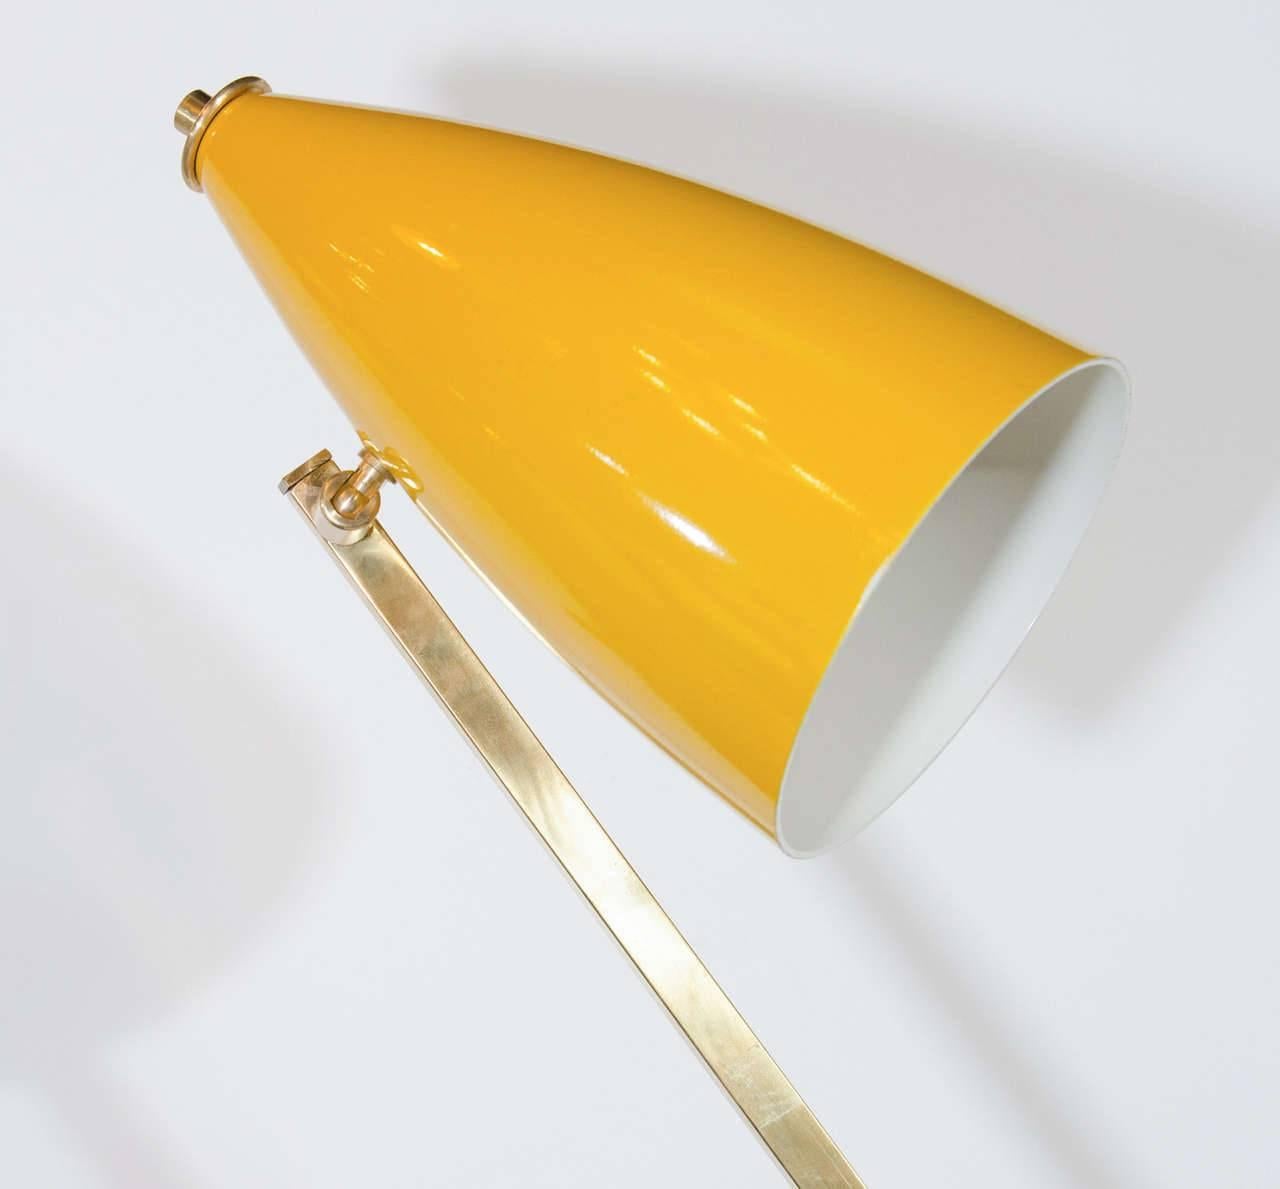 Mid-Century Modern Italian architectural floor lamp. Features asymmetrical frame with geometric arm design in a brass. Has adjustable lamp shades in vibrant primary red and yellow. The shades have enameled finishes in different, yet complimenting